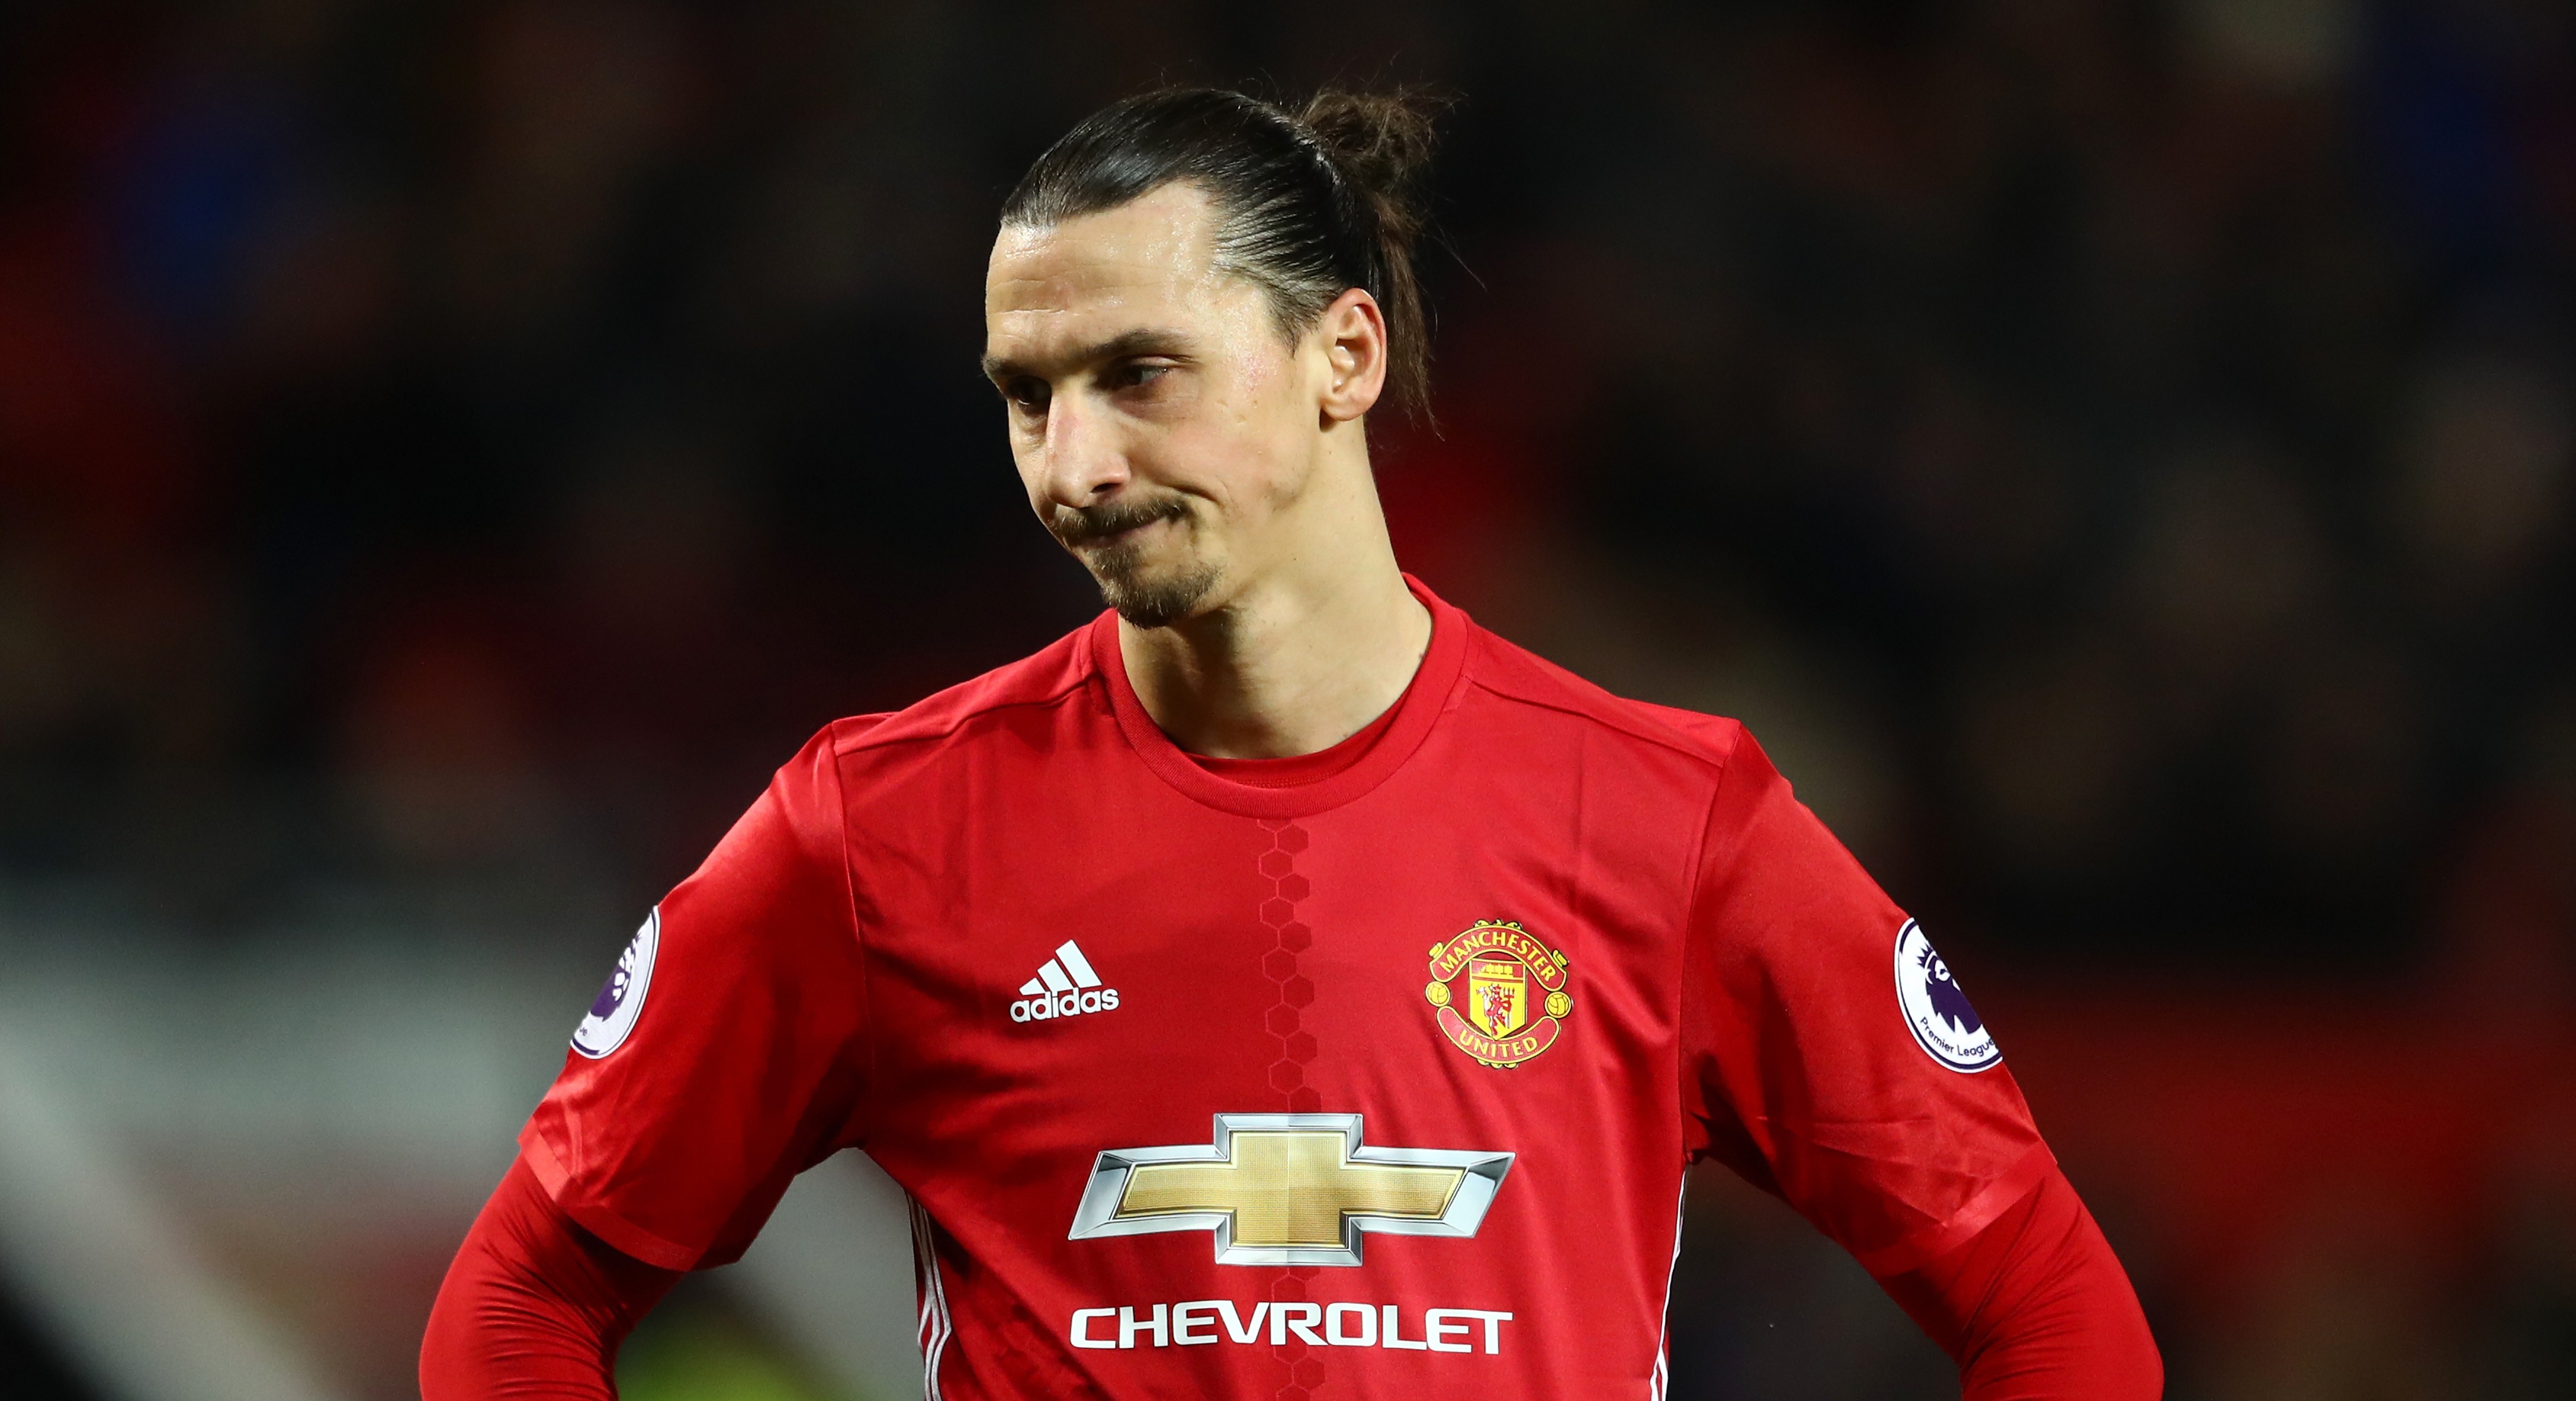 MANCHESTER, ENGLAND - FEBRUARY 01:  Zlatan Ibrahimovic of Manchester United looks on during the Premier League match between Manchester United and Hull City at Old Trafford on February 1, 2017 in Manchester, England.  (Photo by Clive Mason/Getty Images)